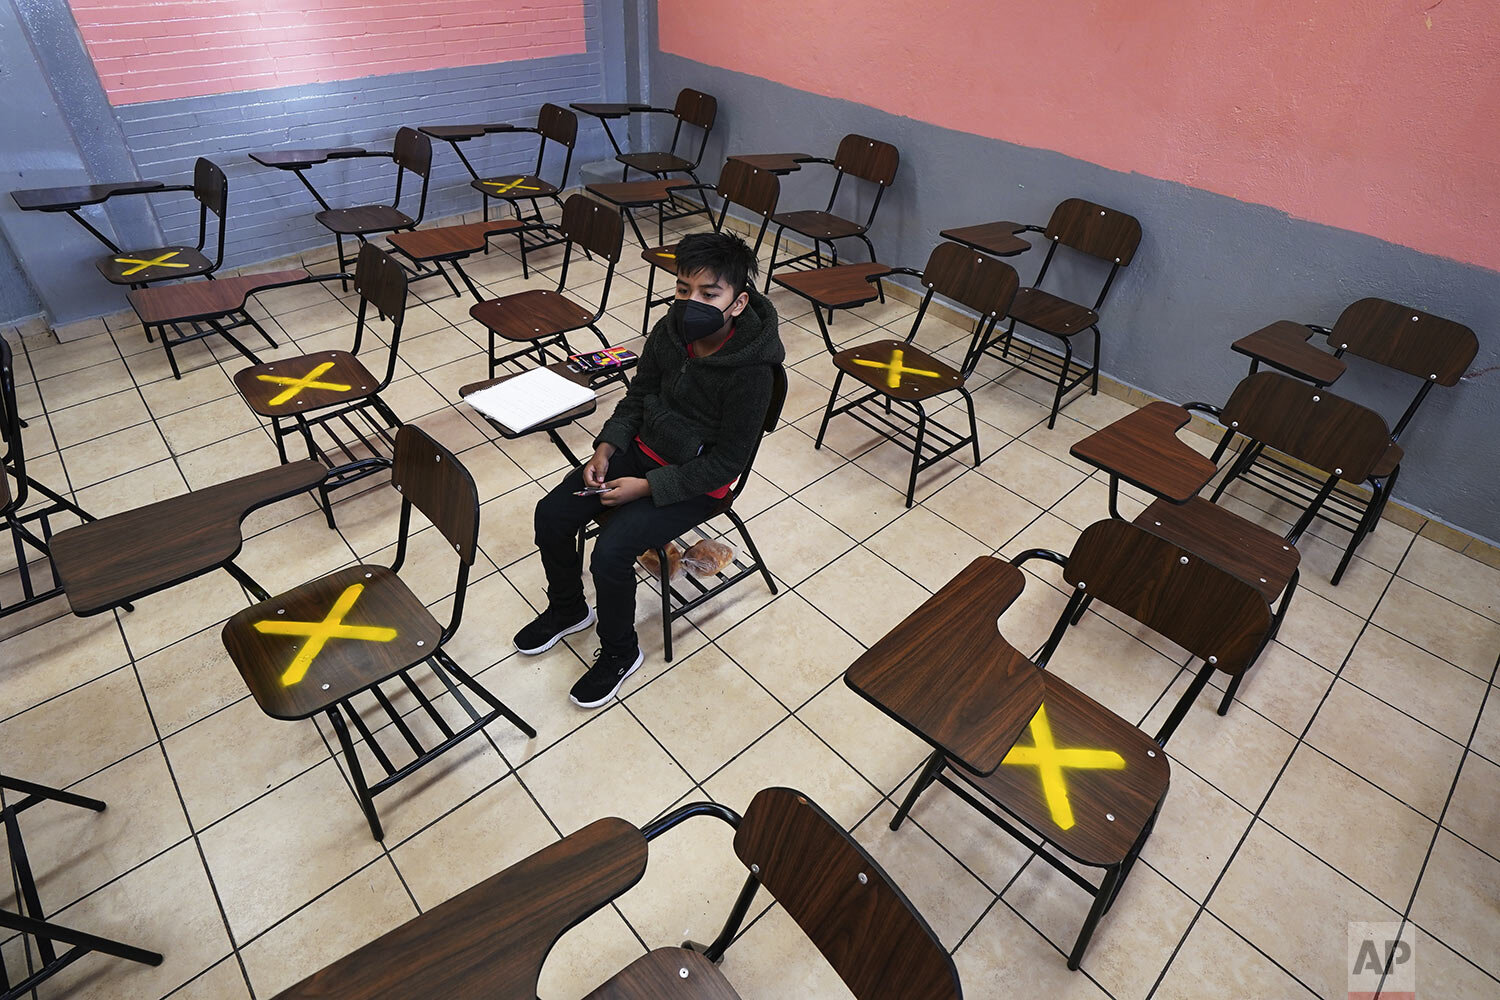  A student sits alone during in-person class at the Republic of Argentina secondary school in Iztacalco, Mexico City, Aug. 30, 2021, on the first day back to school amid the COVID-19 pandemic. (AP Photo/Marco Ugarte) 